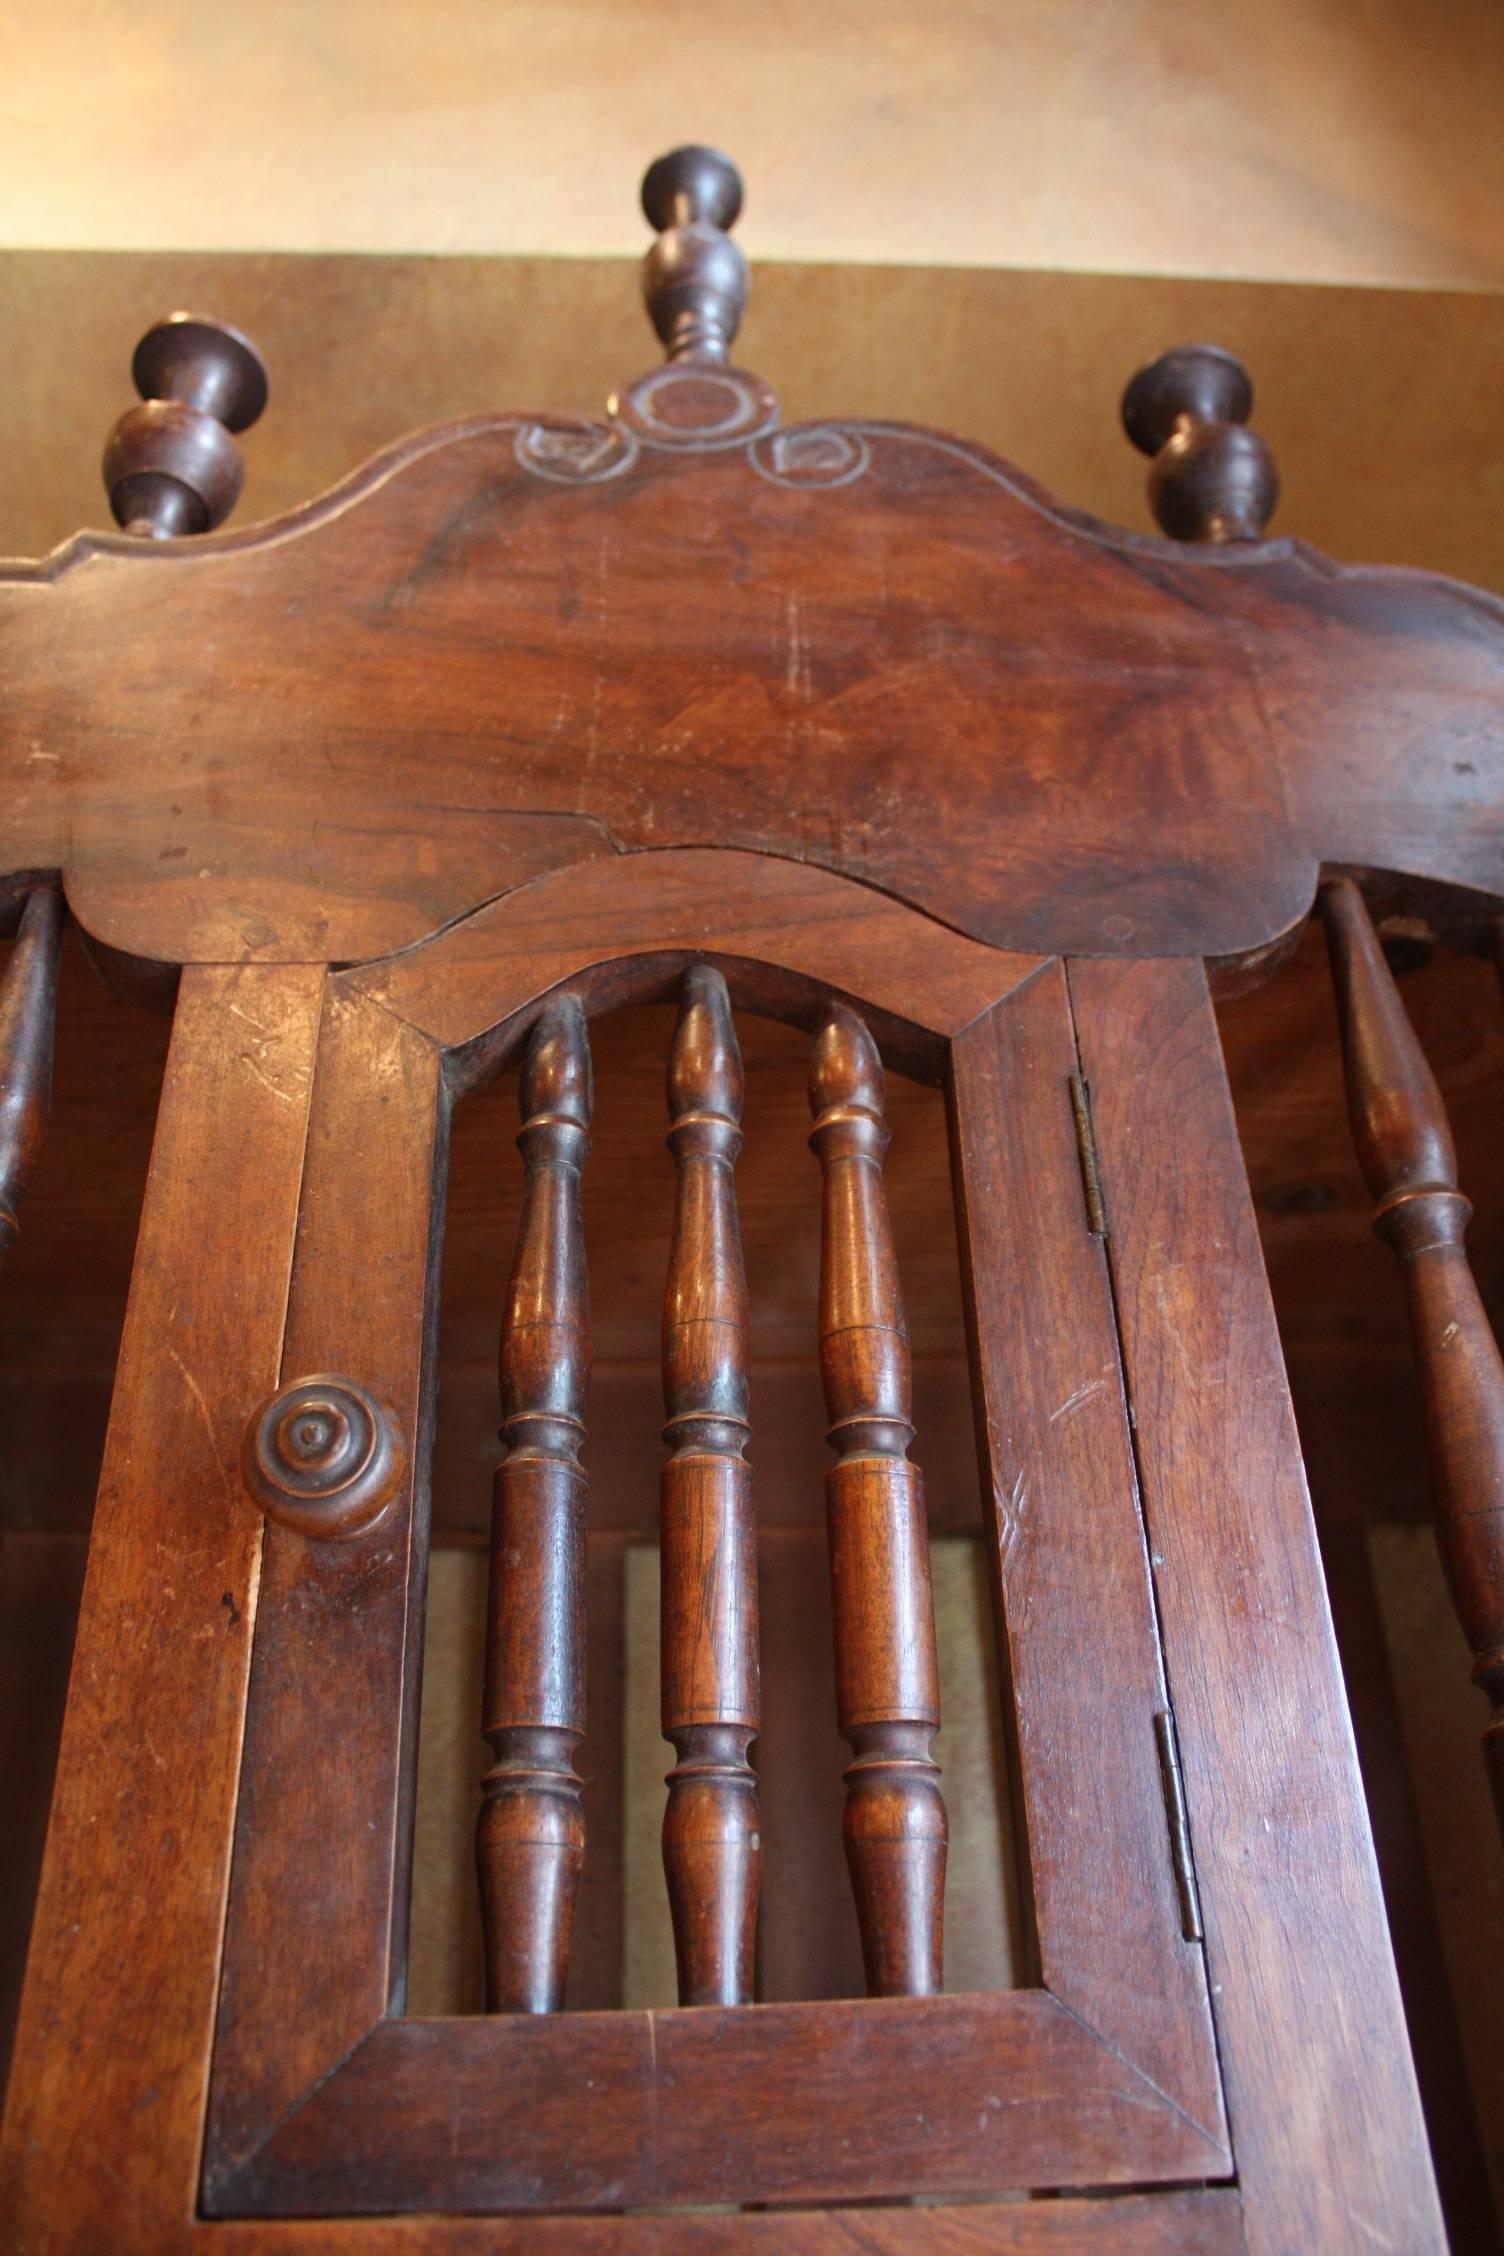 This 19th century hand-carved walnut panetie're from France. Originally used to store French baguettes or long loaves of bread, panetieres were meant to sit on a petrin (dough chest) but eventually grew into elaborate decorative pieces which hung on